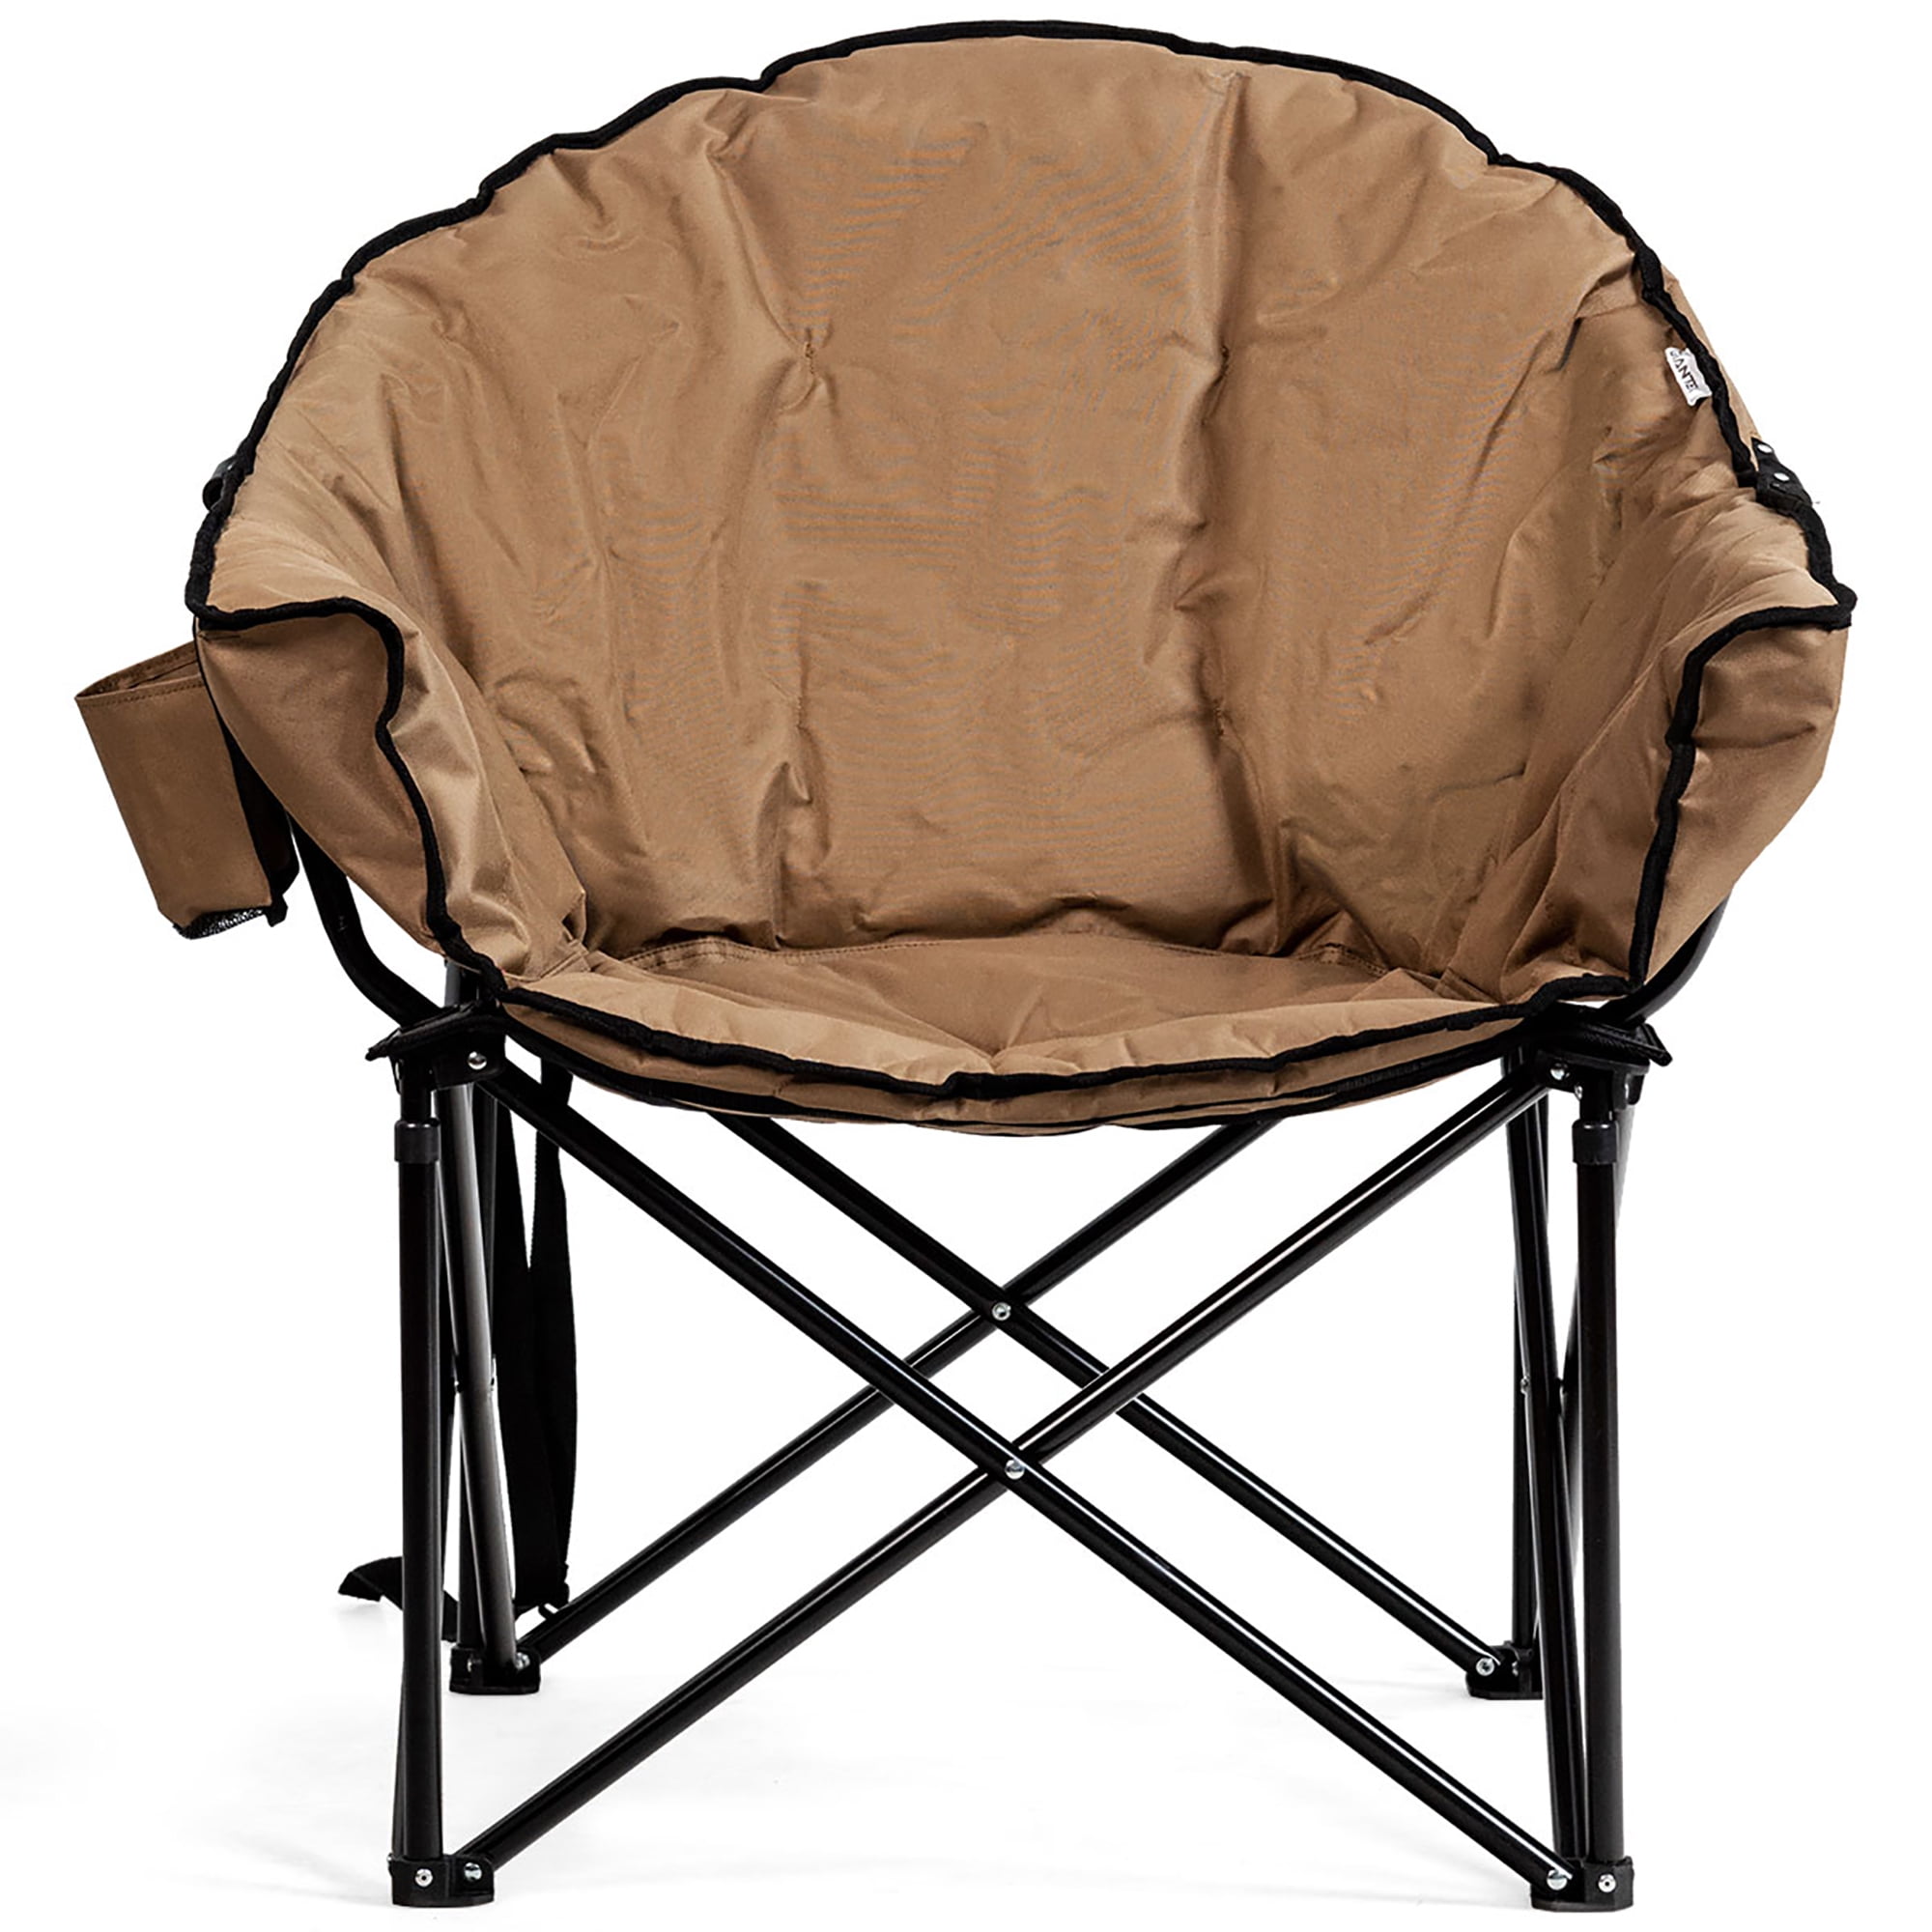 HIGHLANDER DELUXE PADDED MOON CHAIR CAMPING LEISURE FISHING 